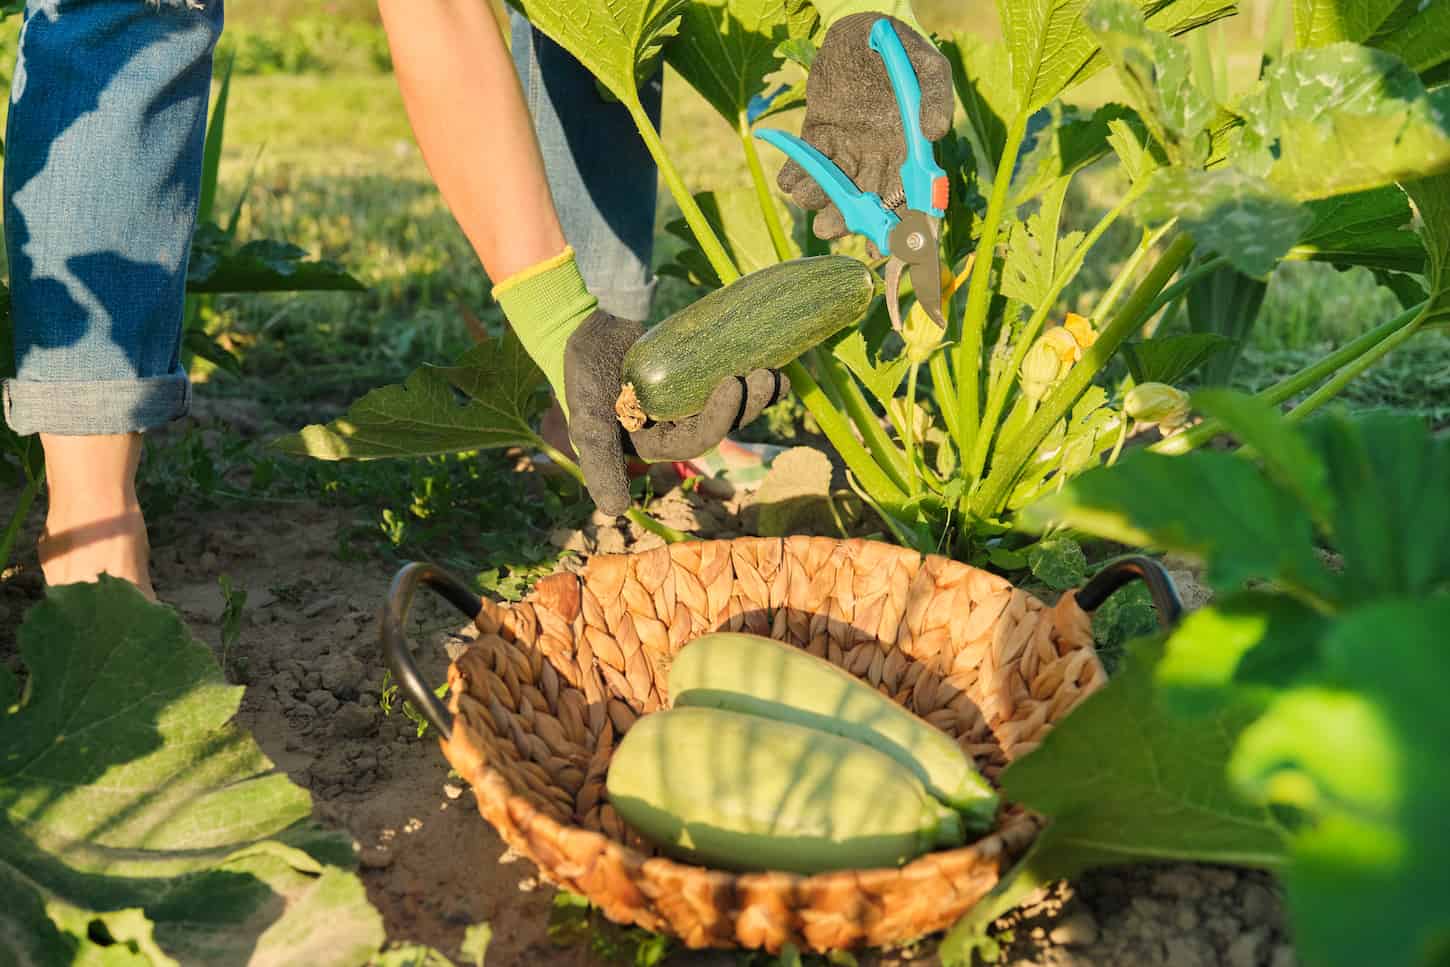 An image of Zucchini harvest in field, farmer's hands with pruner.